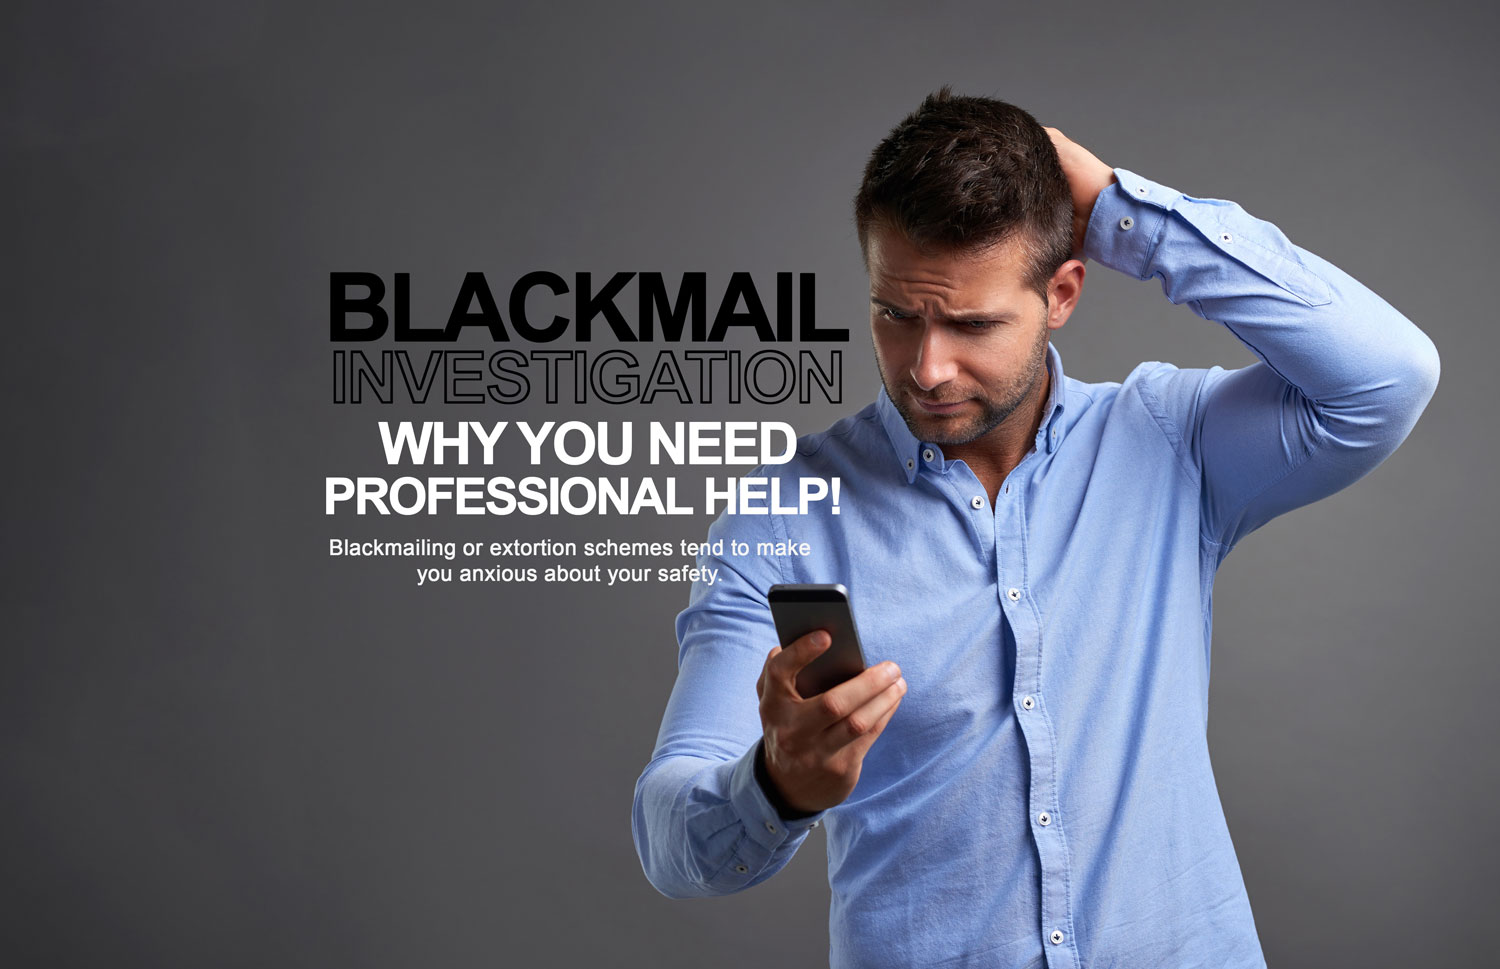 Blackmail Investigation: Why You Need Professional Help